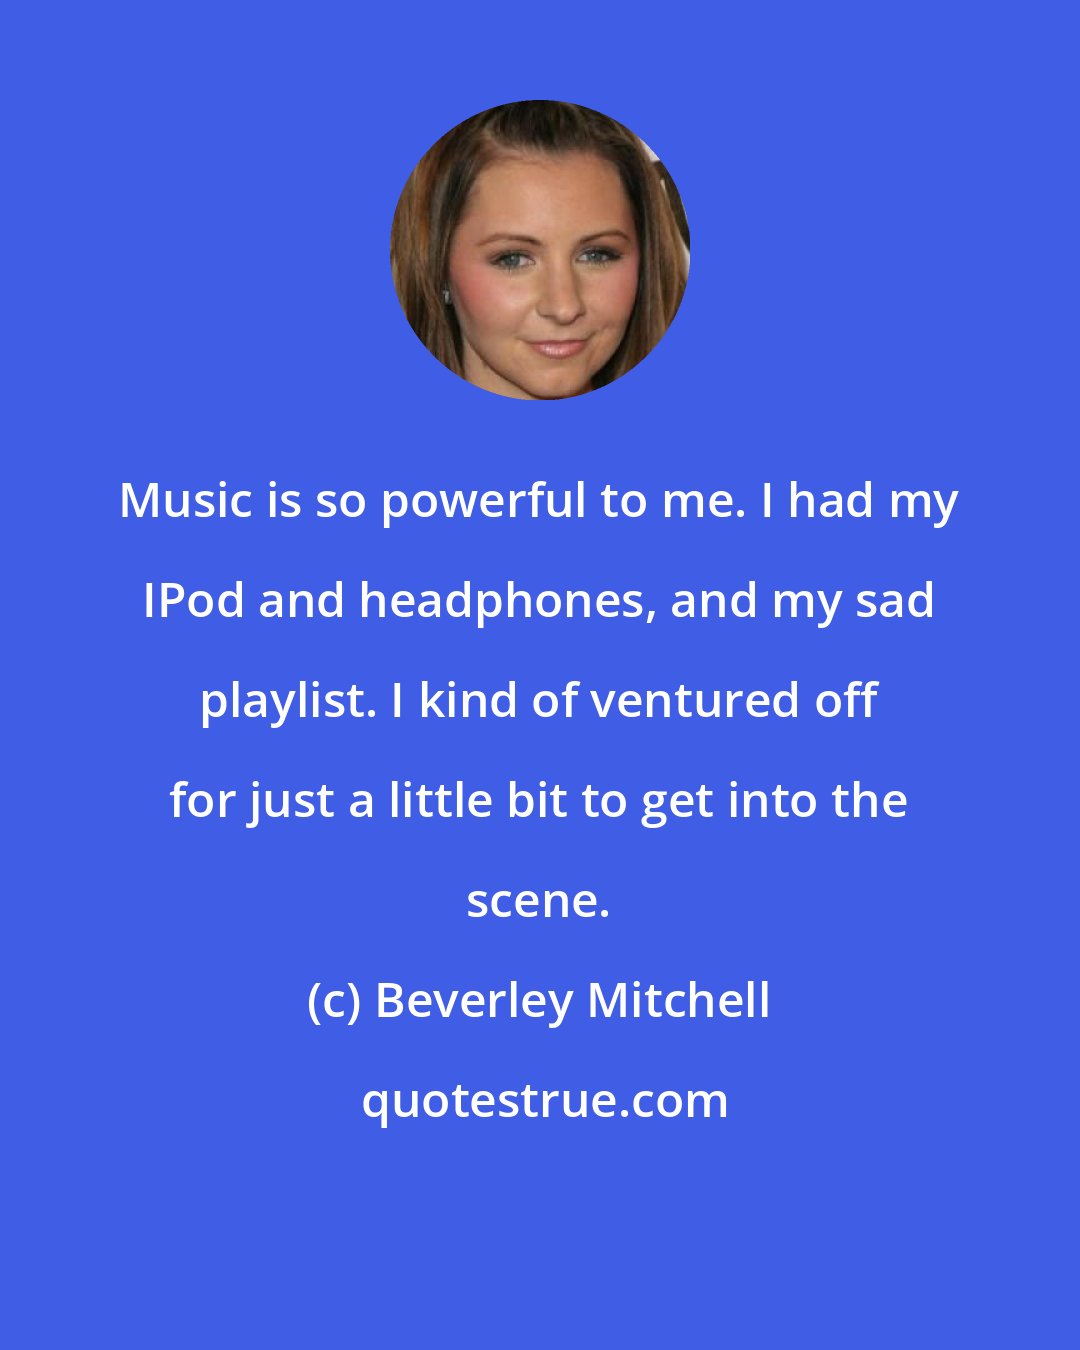 Beverley Mitchell: Music is so powerful to me. I had my IPod and headphones, and my sad playlist. I kind of ventured off for just a little bit to get into the scene.